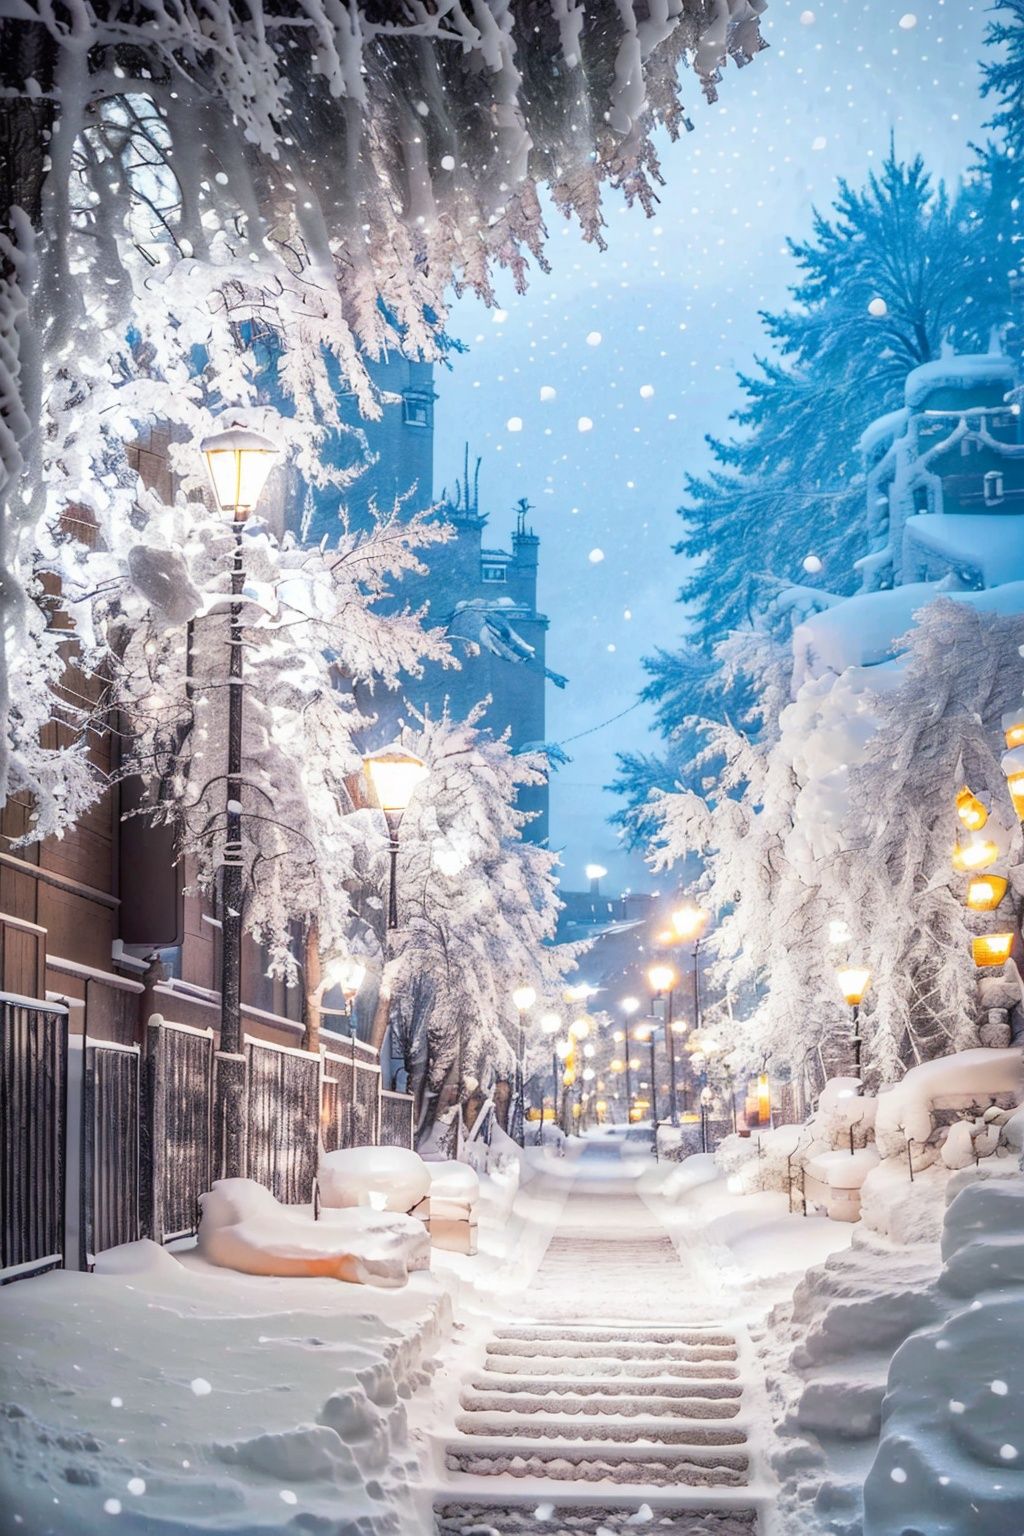  Best quality,8k,cg,lamppost, snow, no humans, scenery, tree, outdoors, winter, ground vehicle, sky, car, motor vehicle, road, bare tree, building, snowing